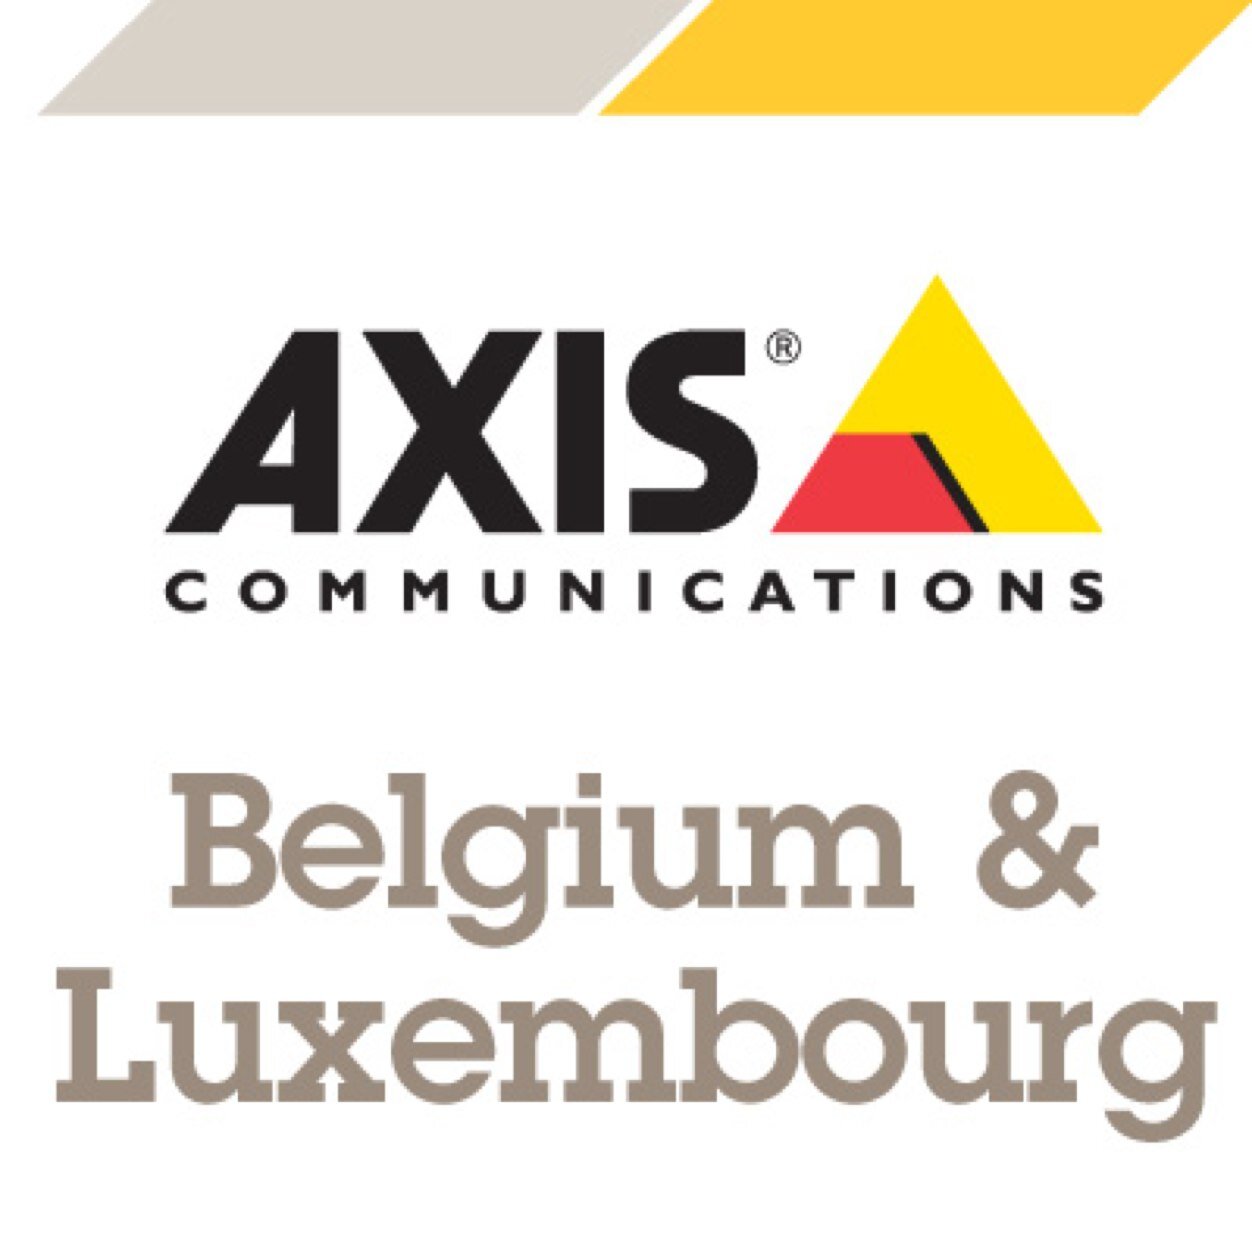 As the technology leader in network video, Axis offers products and services for video surveillance and analytics, access control, intercoms and audio systems.